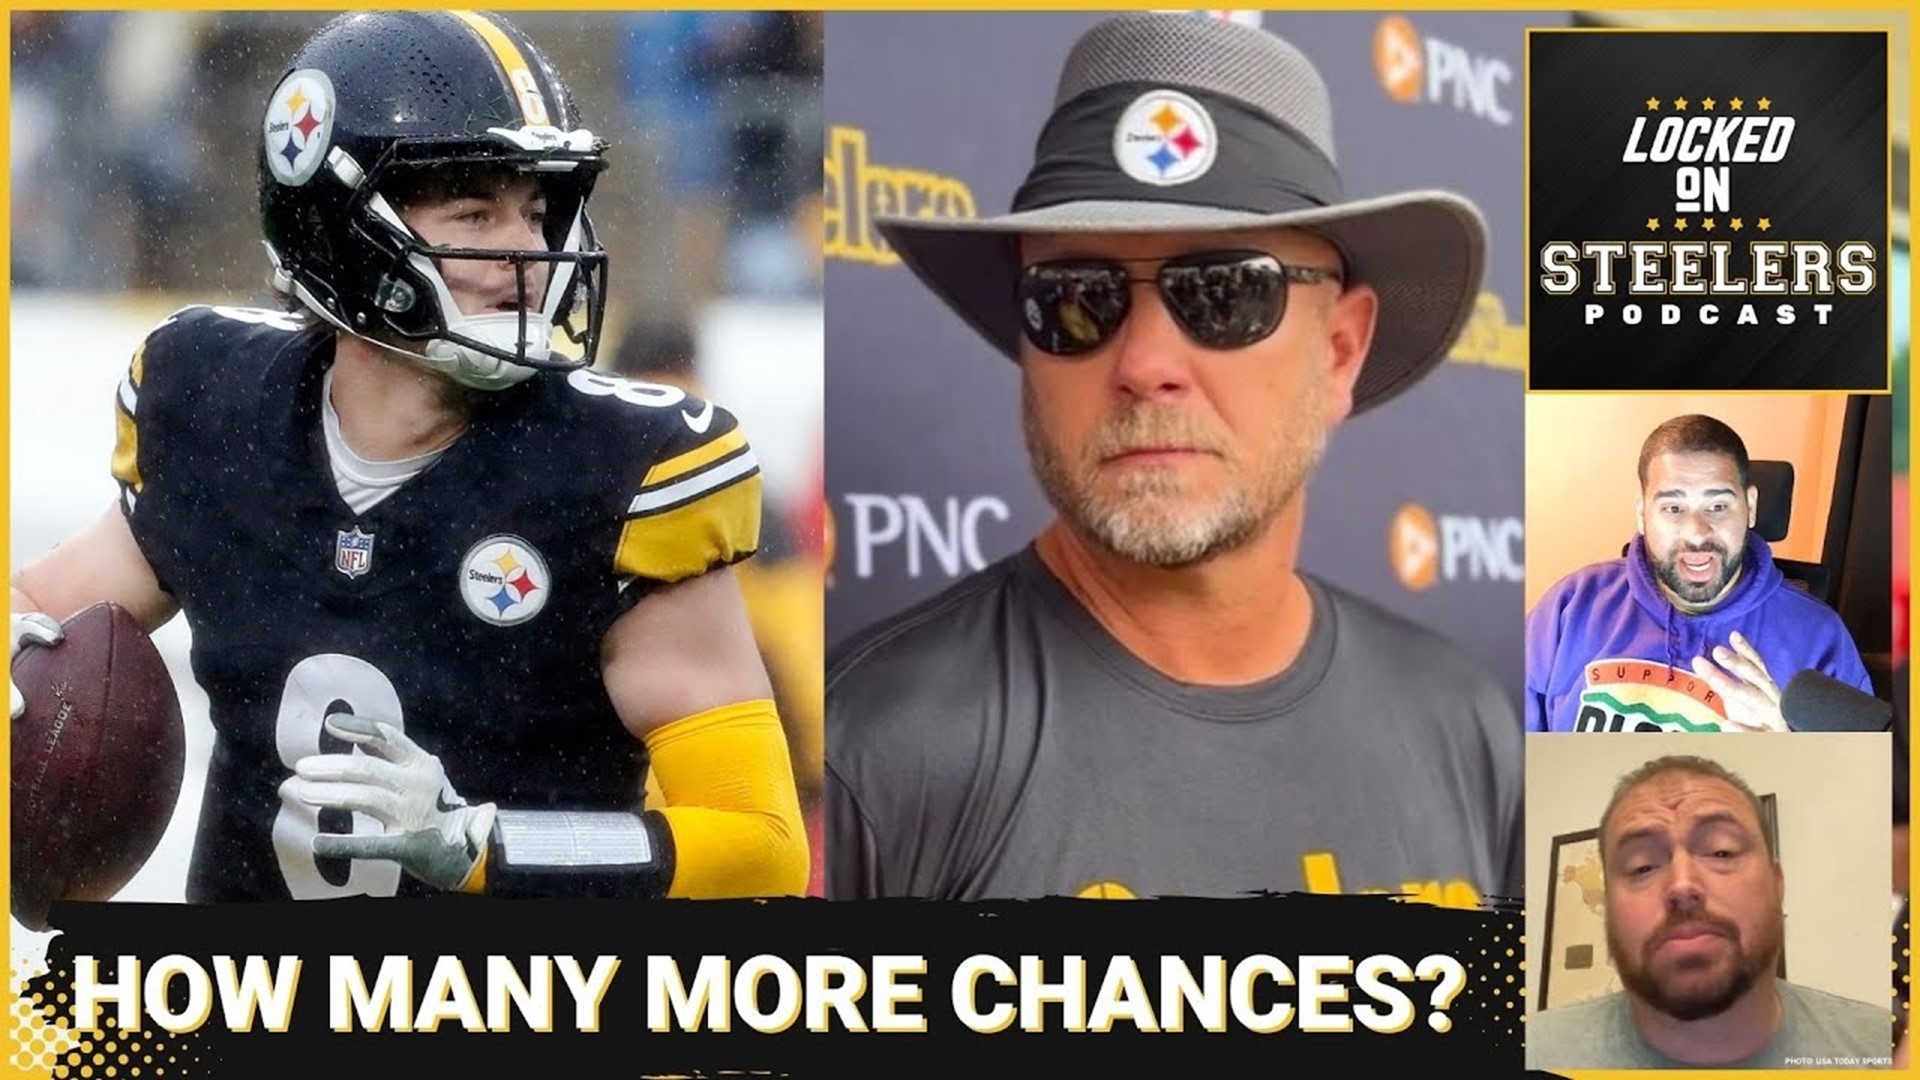 The Pittsburgh Steelers will get Kenny Pickett back from injury to start against the Tennessee Titans Thursday night. But can he and the offense find answers?